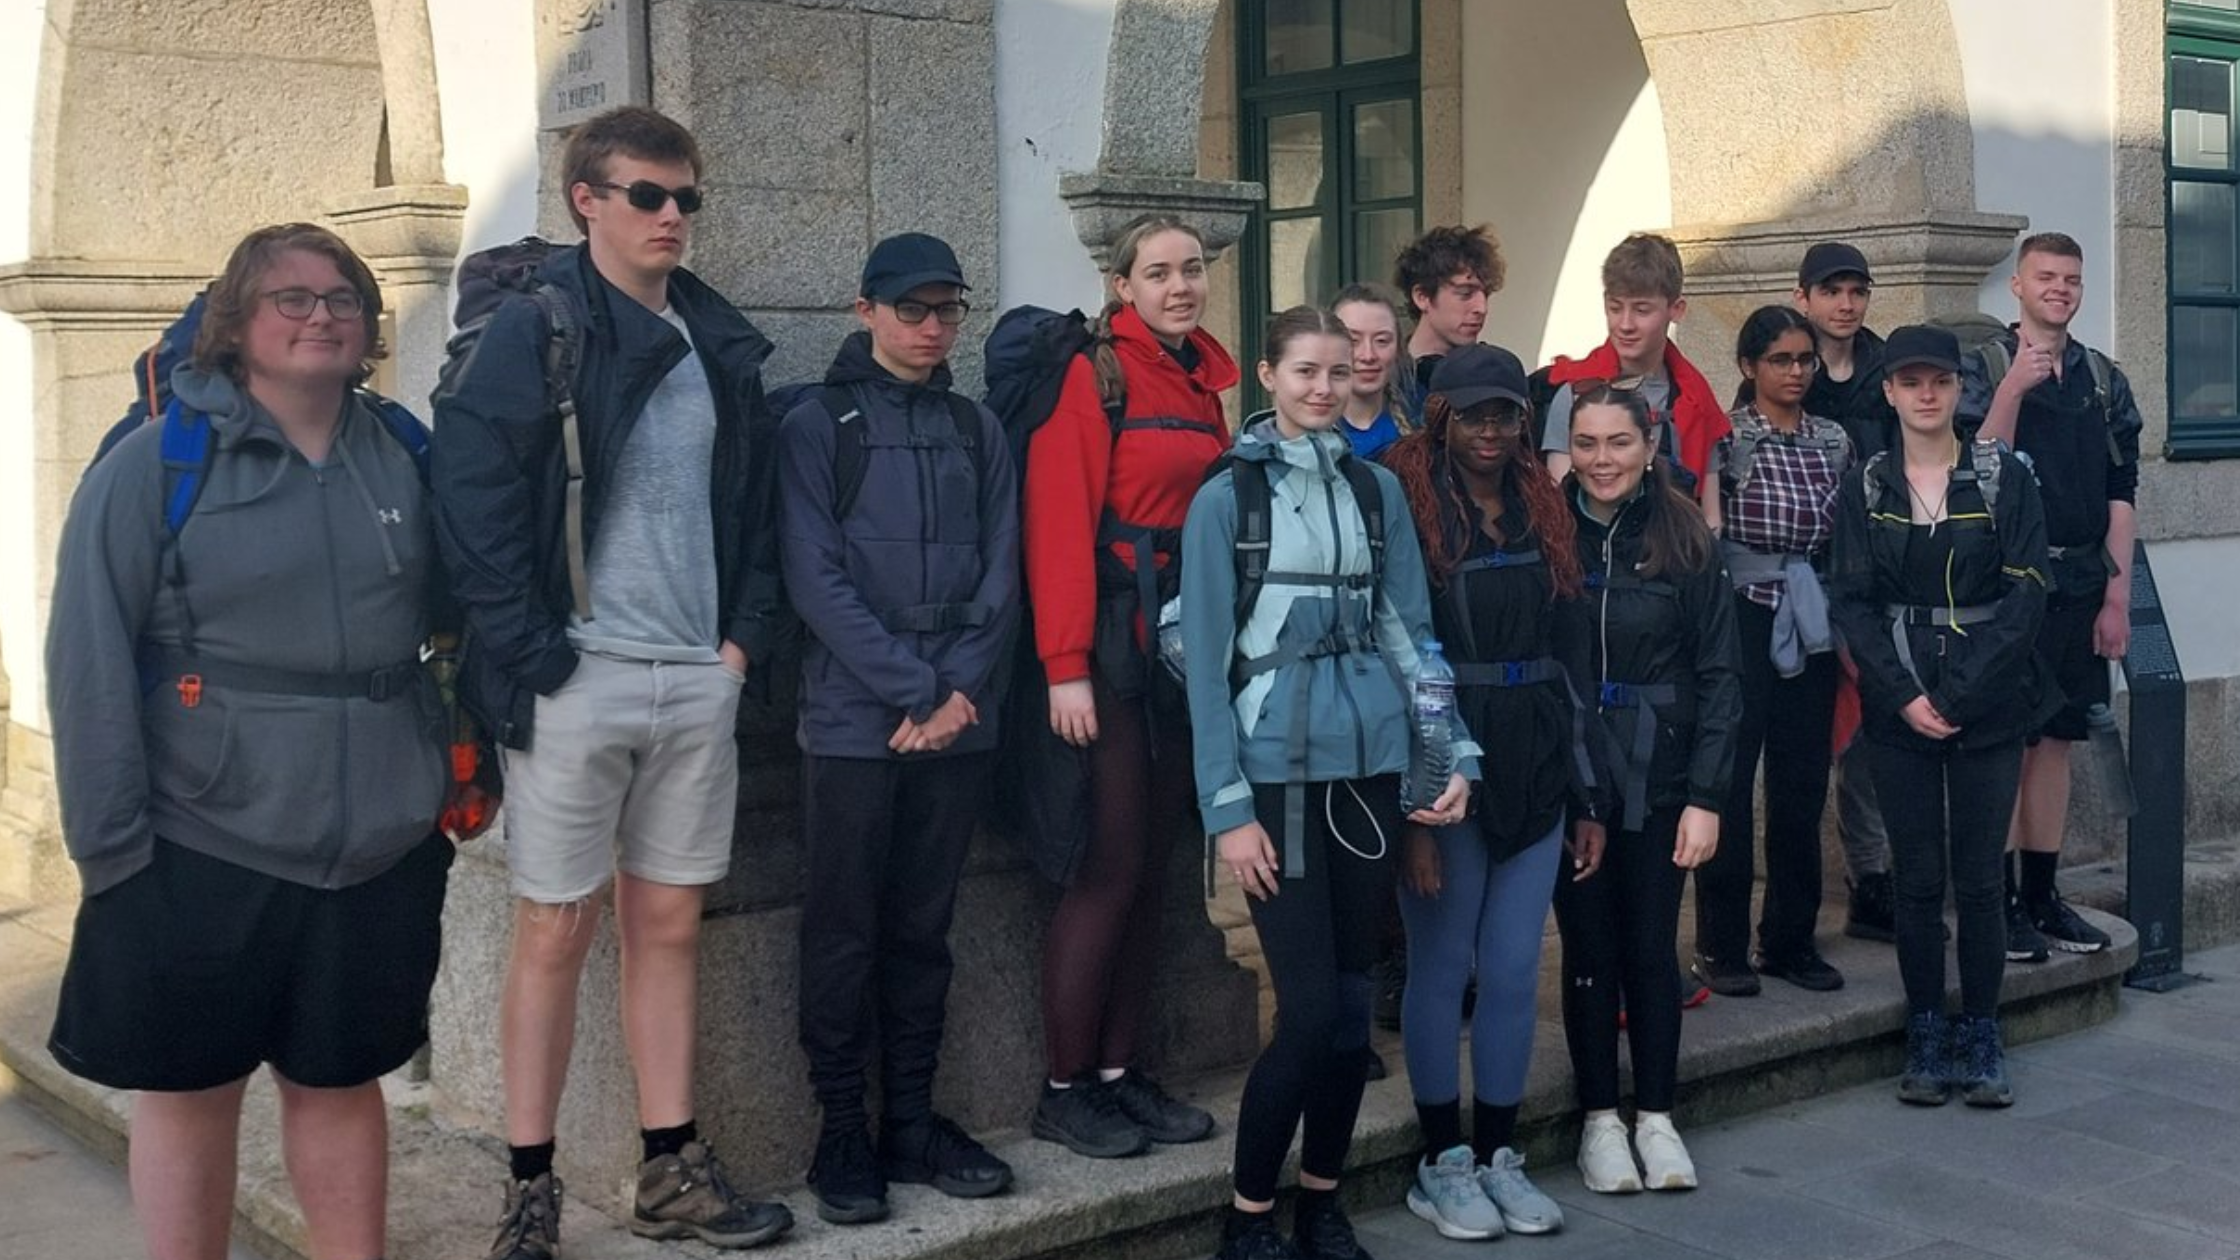 A group photo of students from Pobalscoil Neasáin. They are lined up on a street getting ready for their Hike.